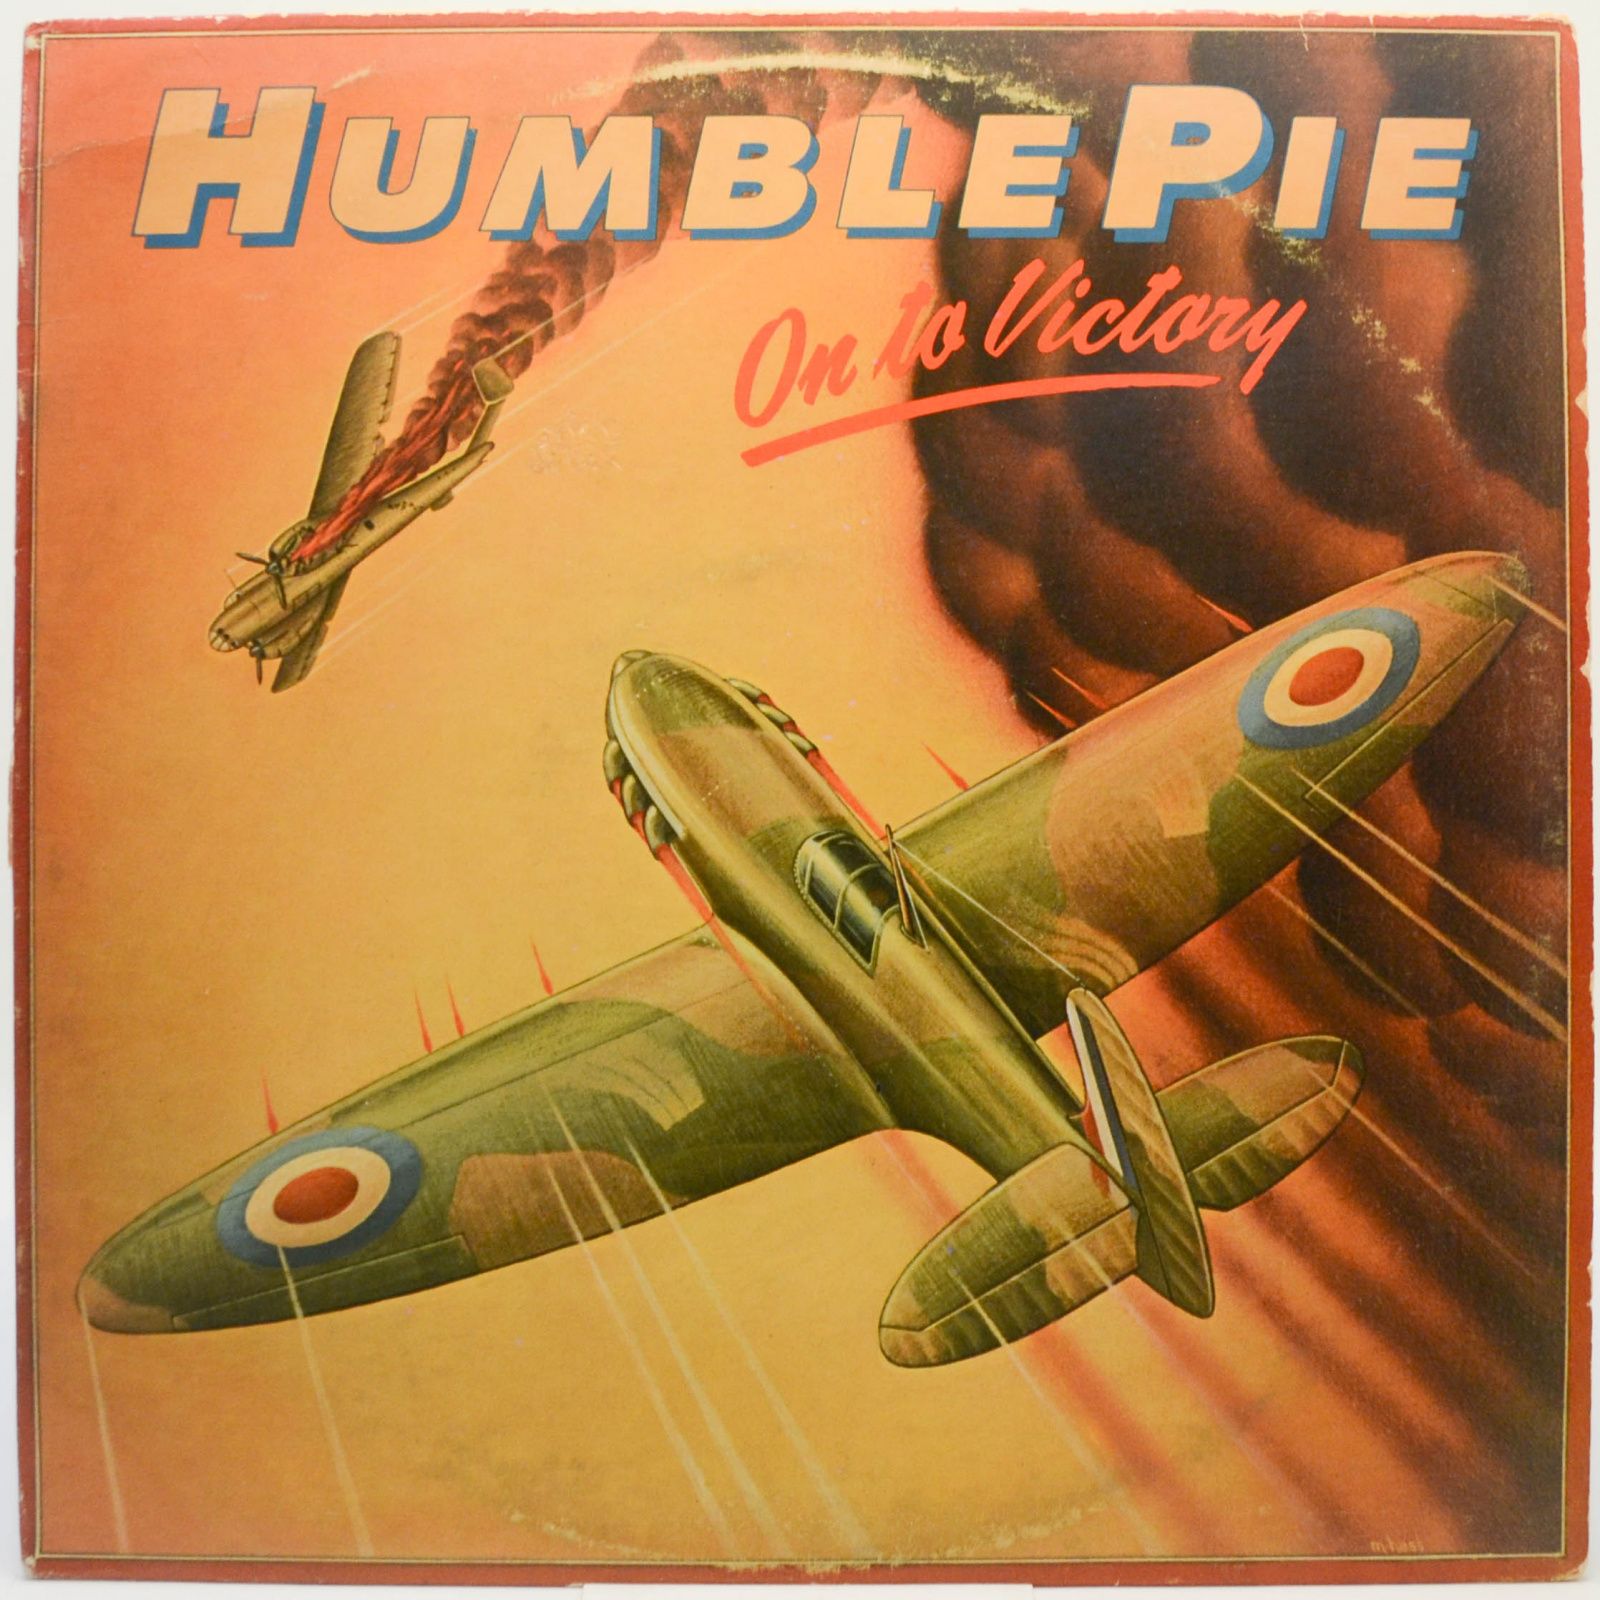 Humble Pie — On To Victory, 1980